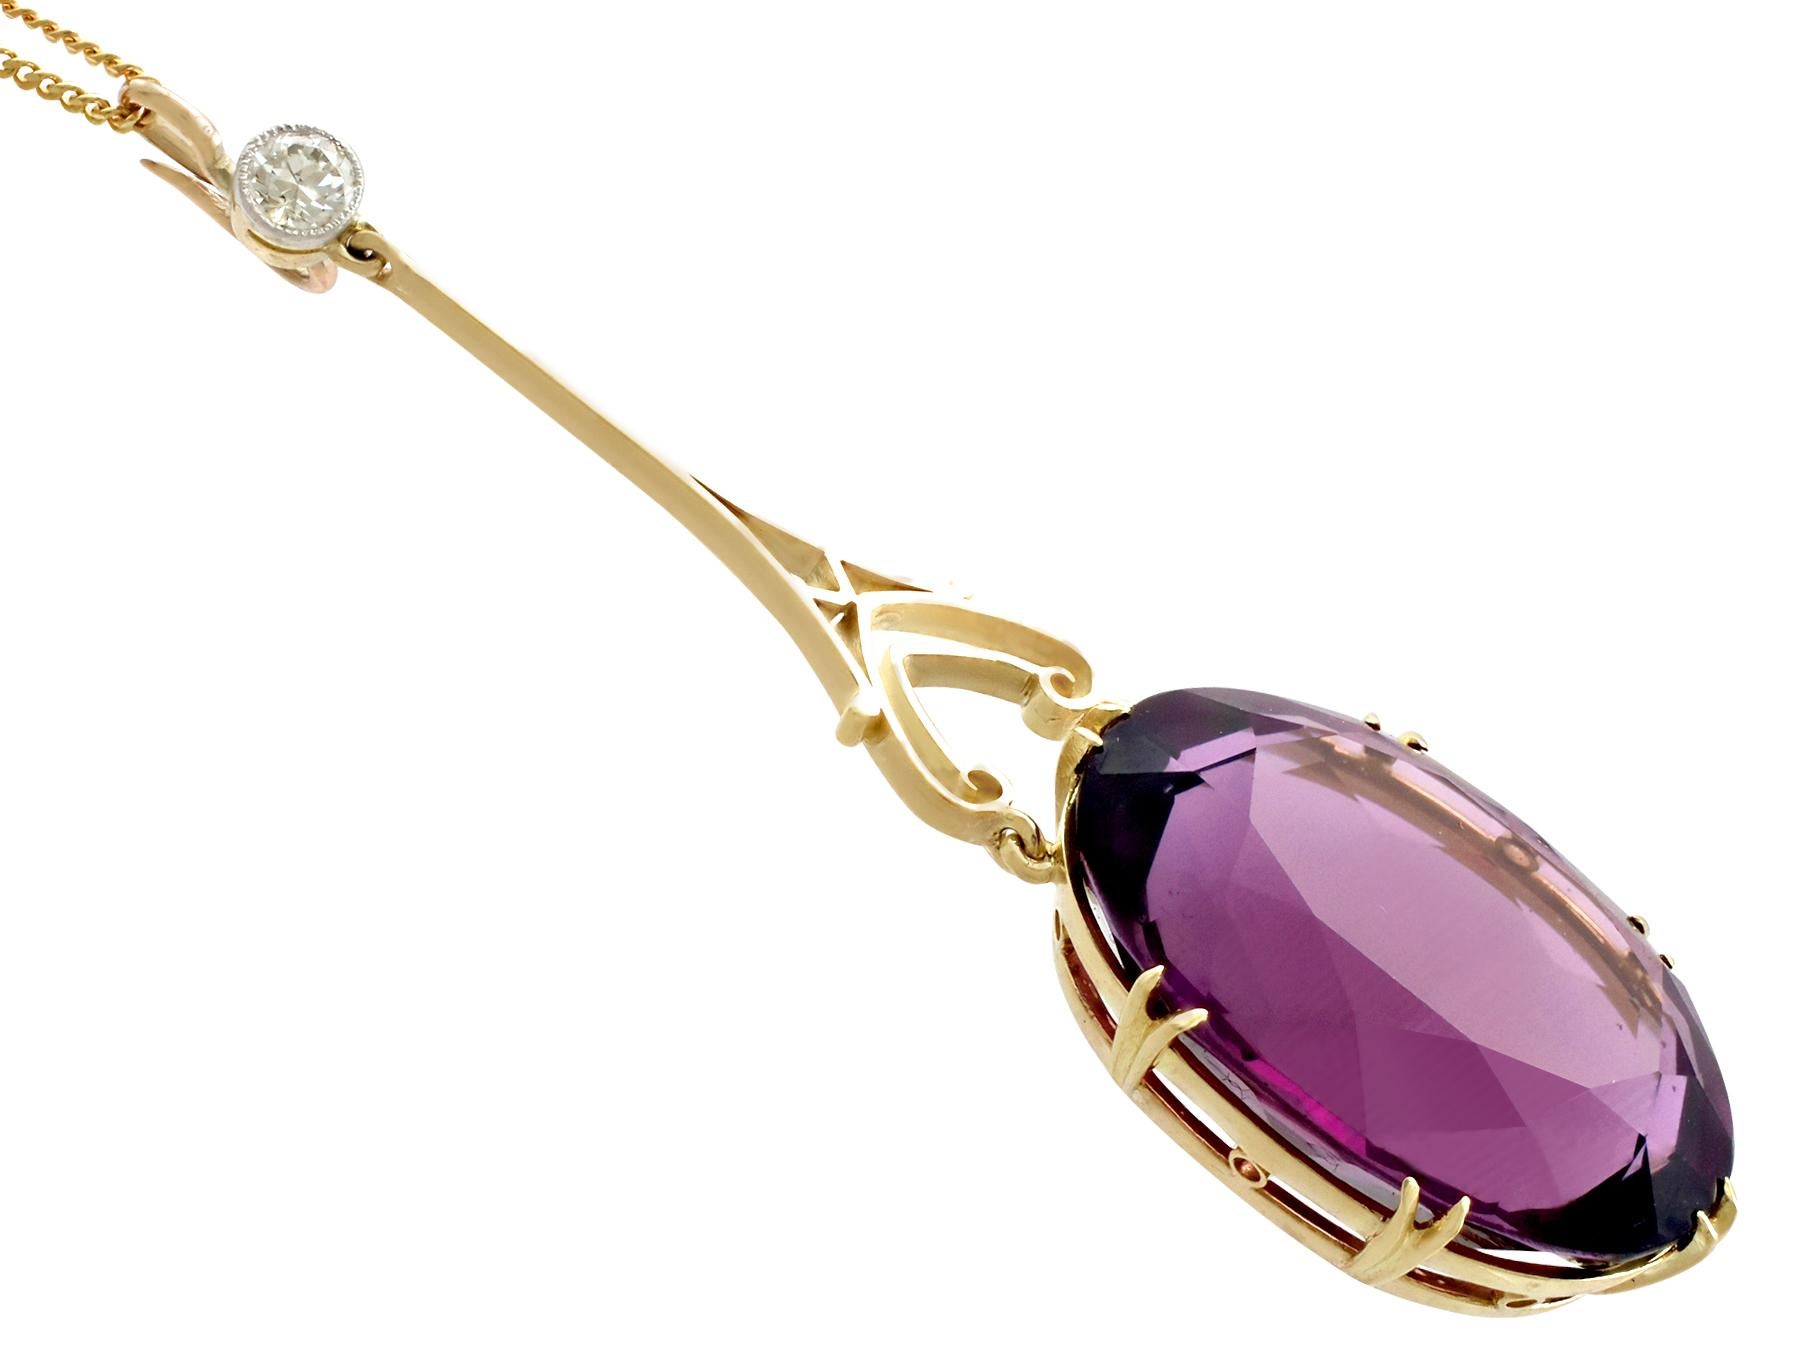 Women's or Men's Antique Victorian 1890s 24.63 Carat Amethyst and Yellow Gold Pendant